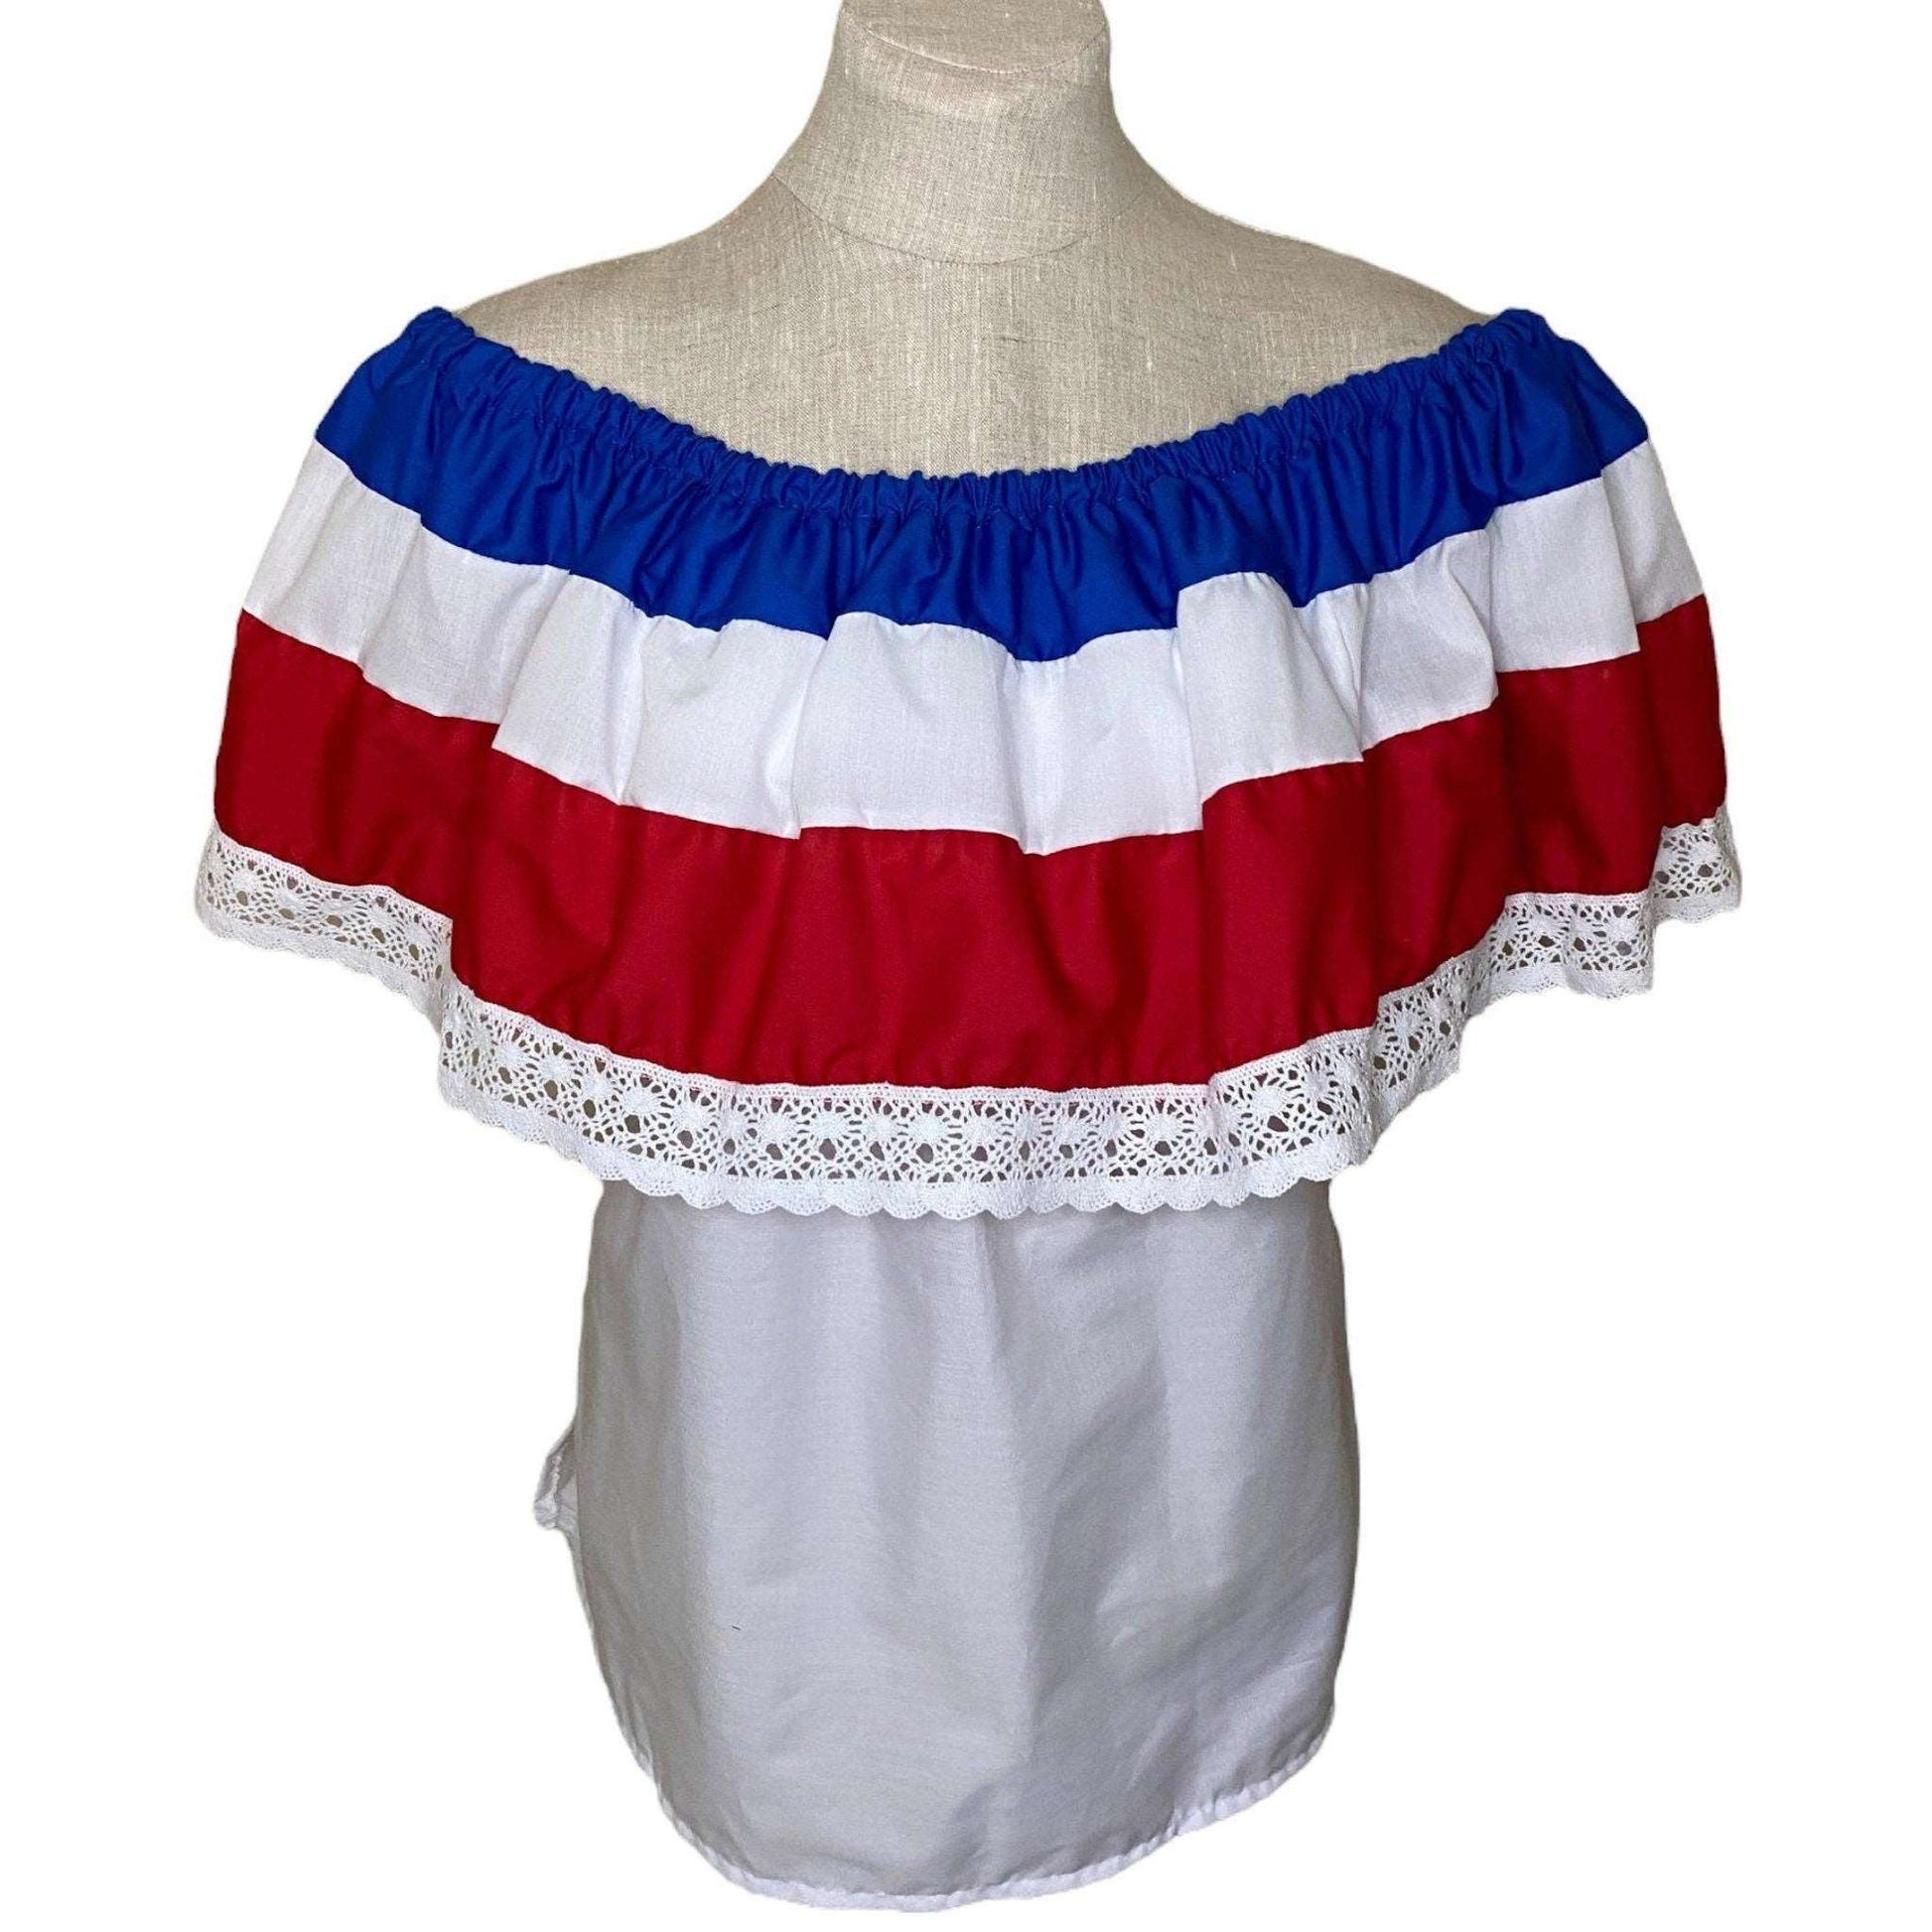 Puerto Rican, Dominican Republic, Costa Rican Blouse, White Off Shoulder with Red, White and Blue Stripes - Vivian Fong Designs